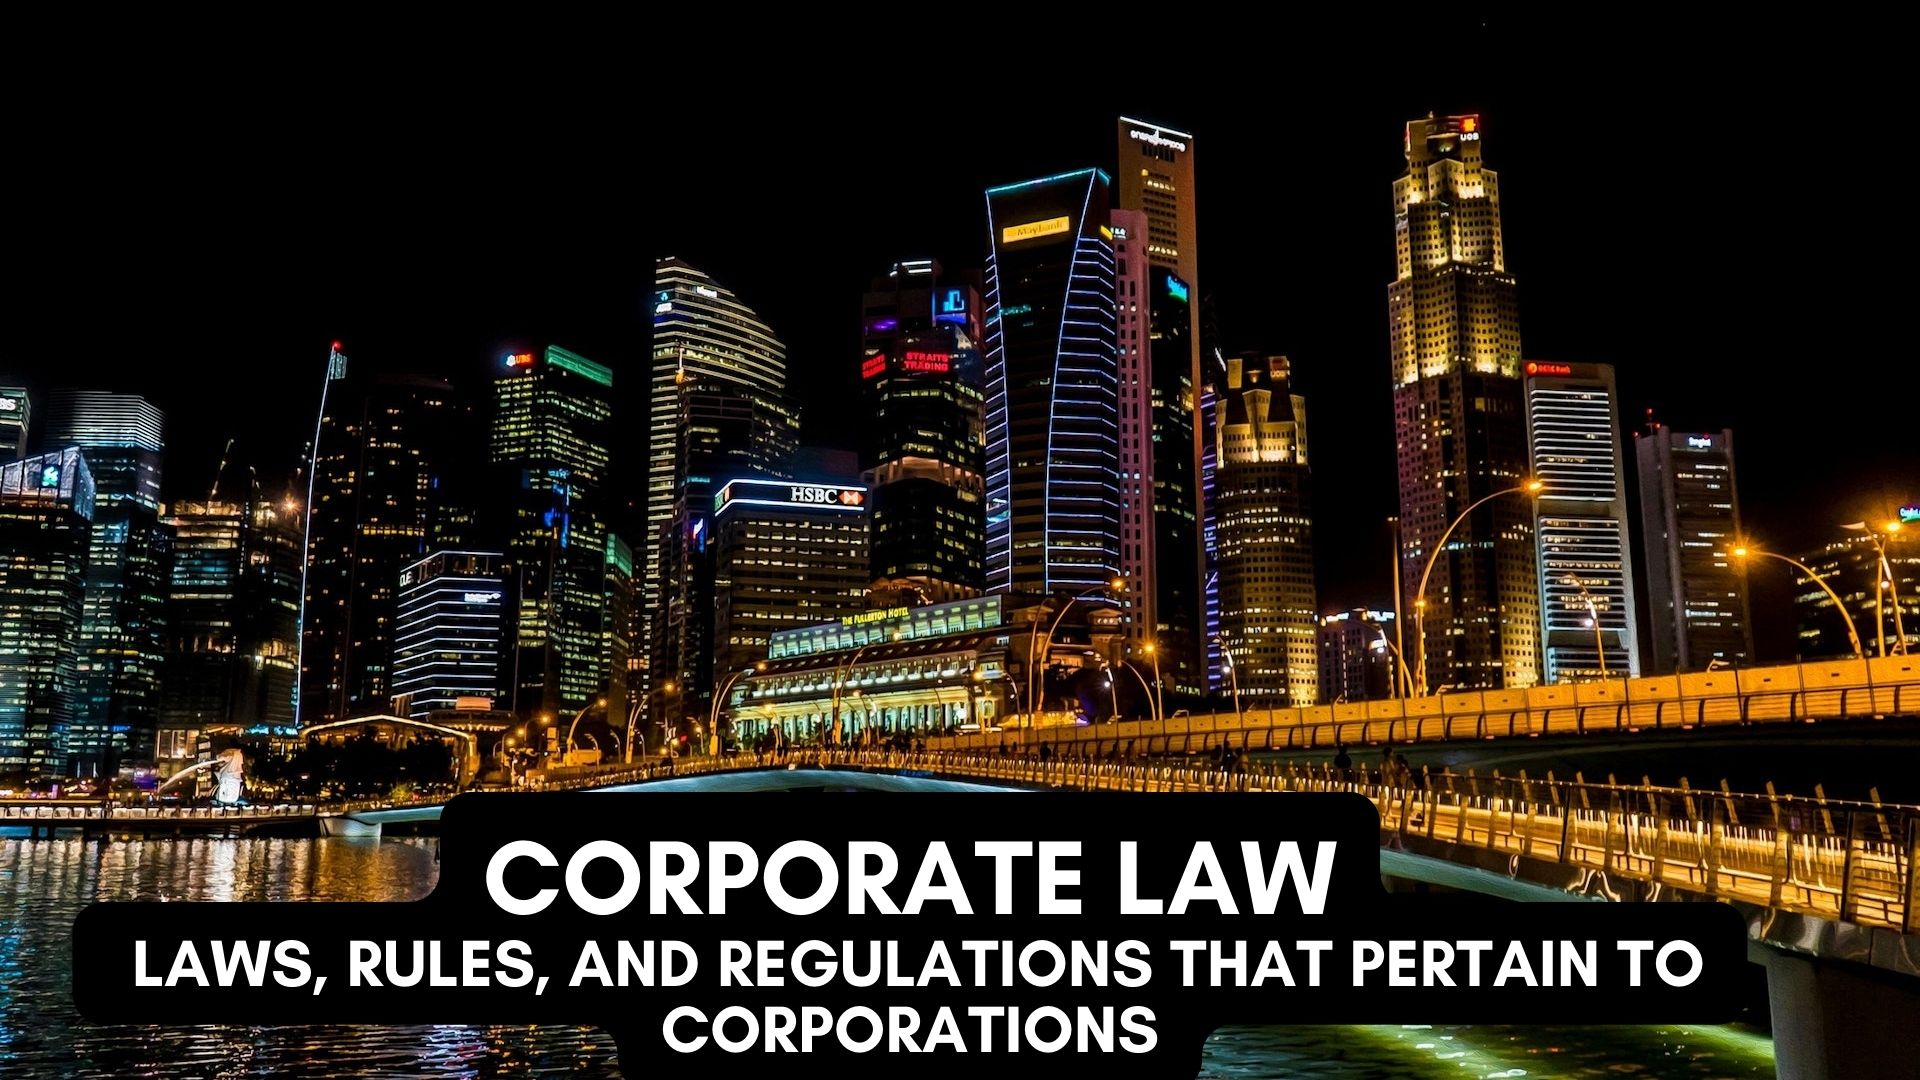 Corporate Law - What Is It And Its Purposes